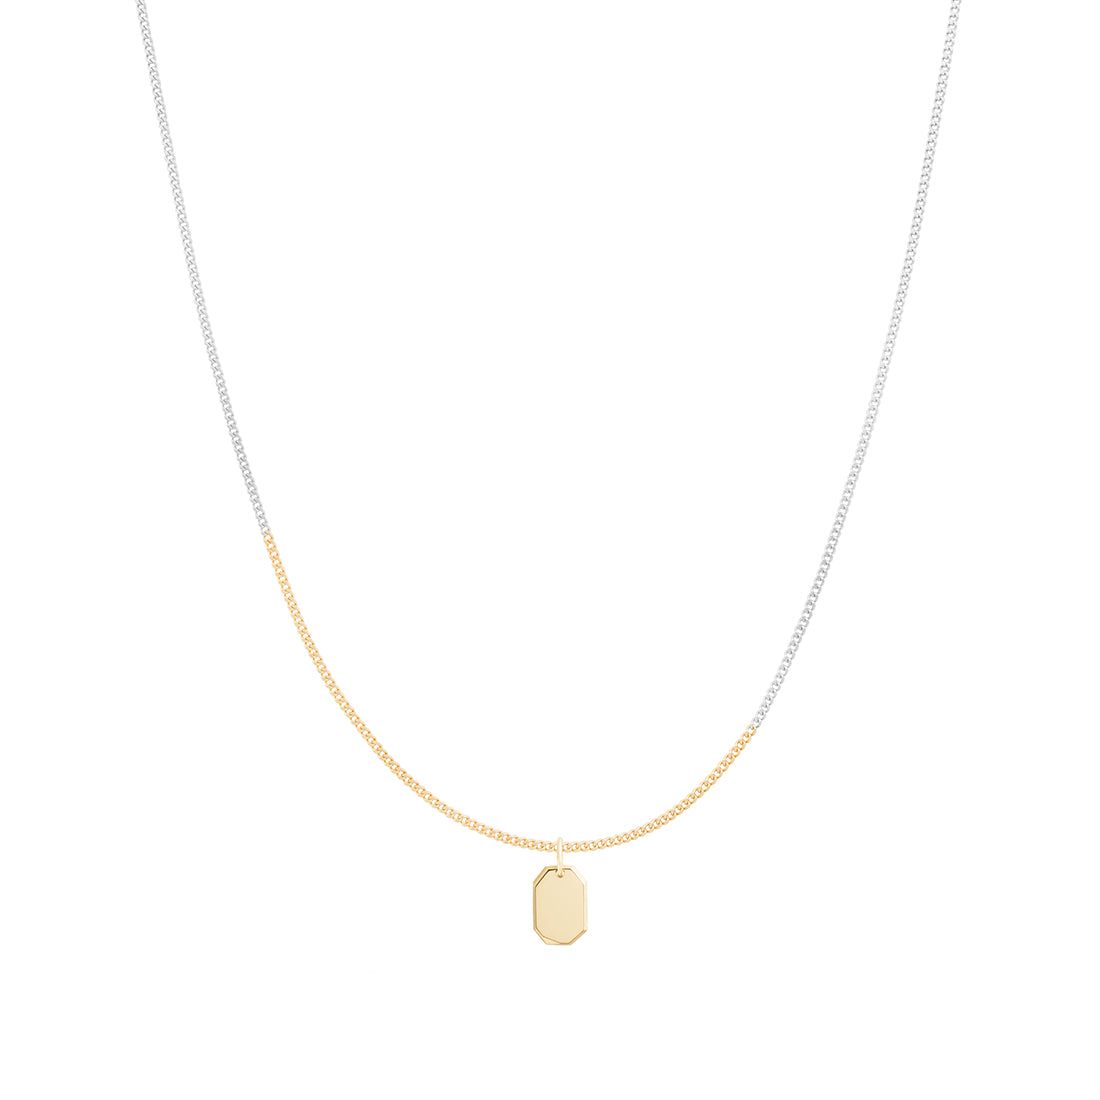 18K　コンビネーション　Combination　ネックレス　Necklace　Chain Necklace　チェーンネックレス